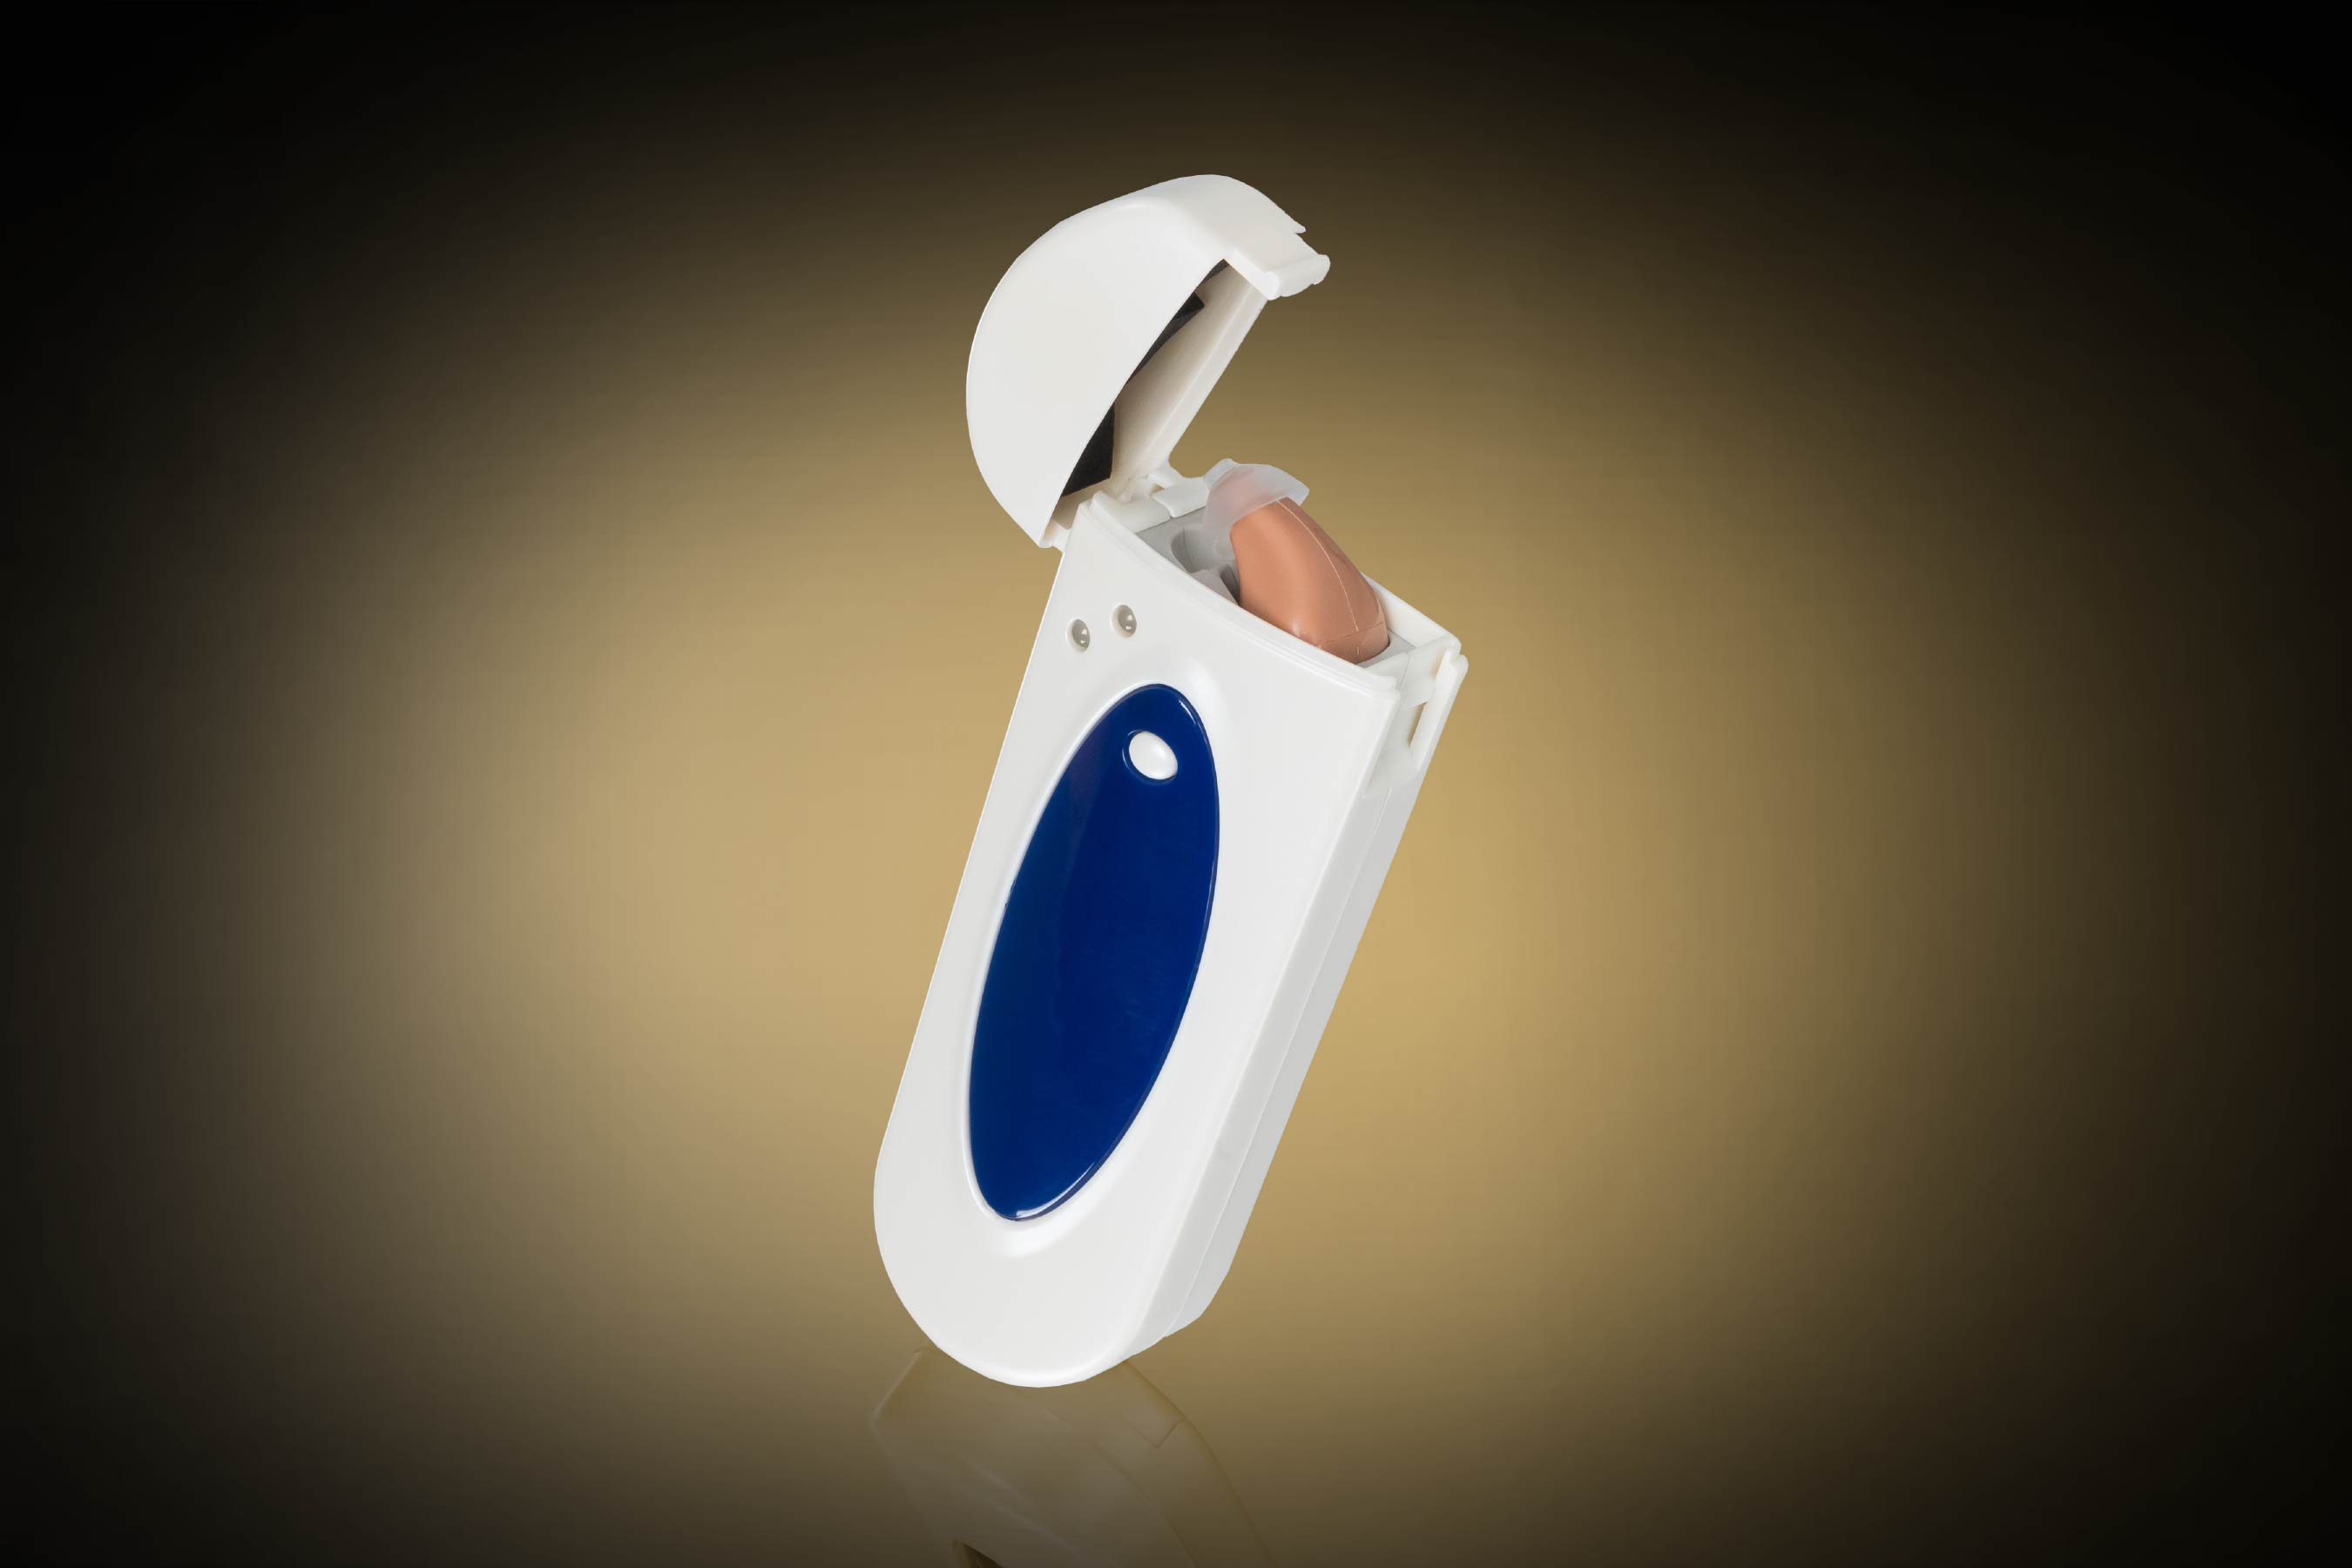 Rechargeable ITC Type Hearing Aid (single unit)